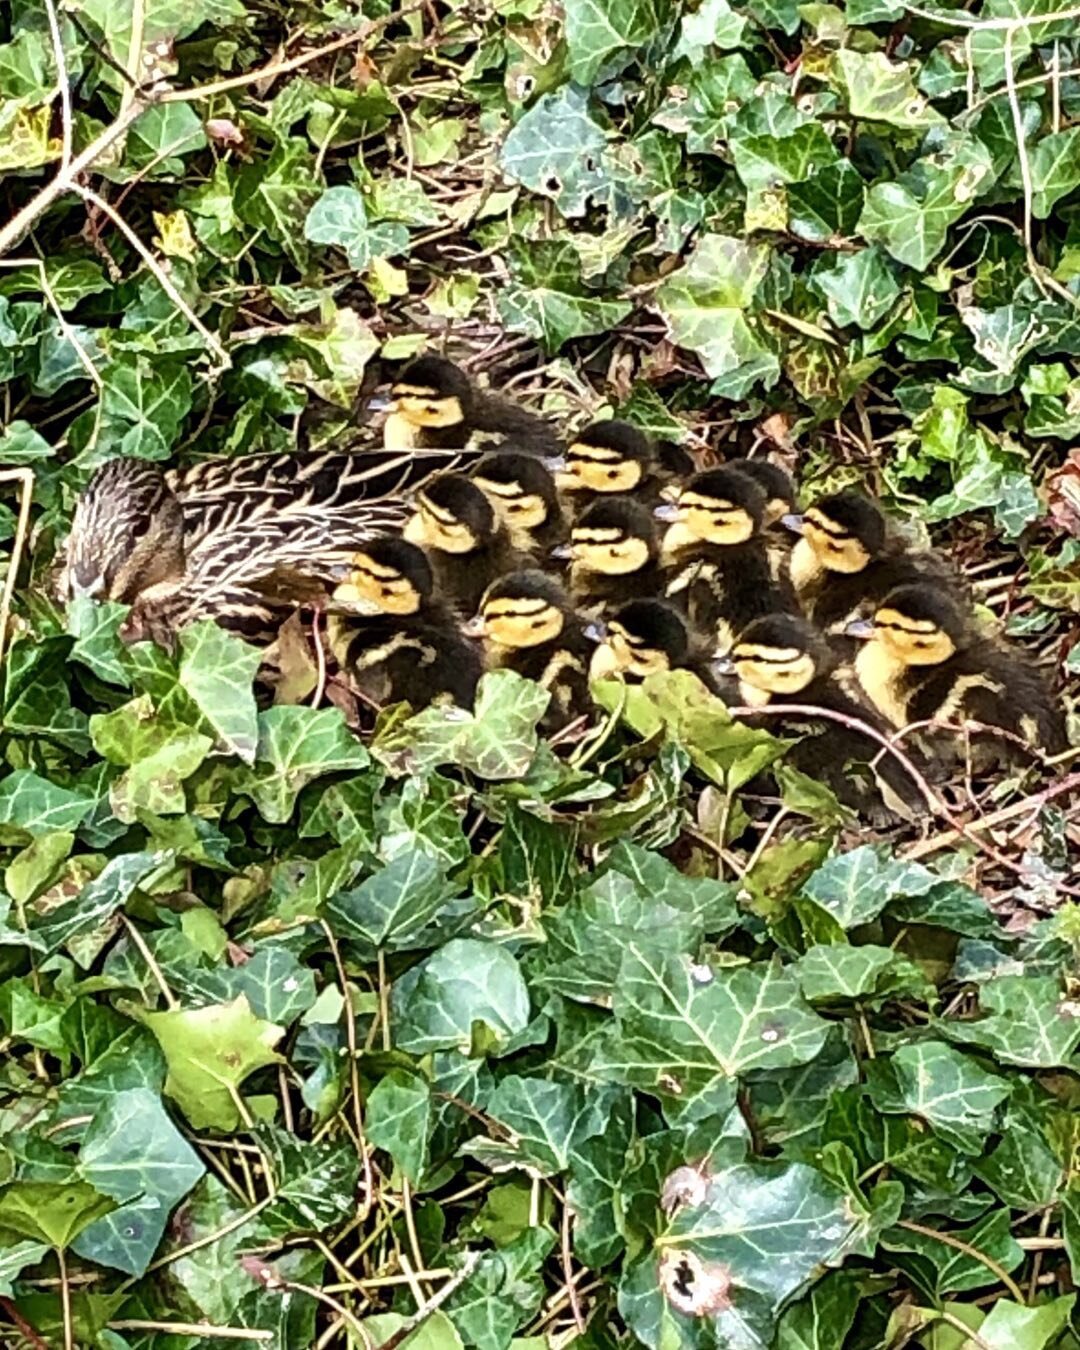 CAMOUFLAGED DUCKLINGS!
So excited to come across a mother duck and her young hiding in the chicken pen 🦆 🐓
Clever mum keeping them safe from the foxes. Made them a paddling pool to splash around in. 
#shropshirewildlife 
#hidinginclearsight 
#brood